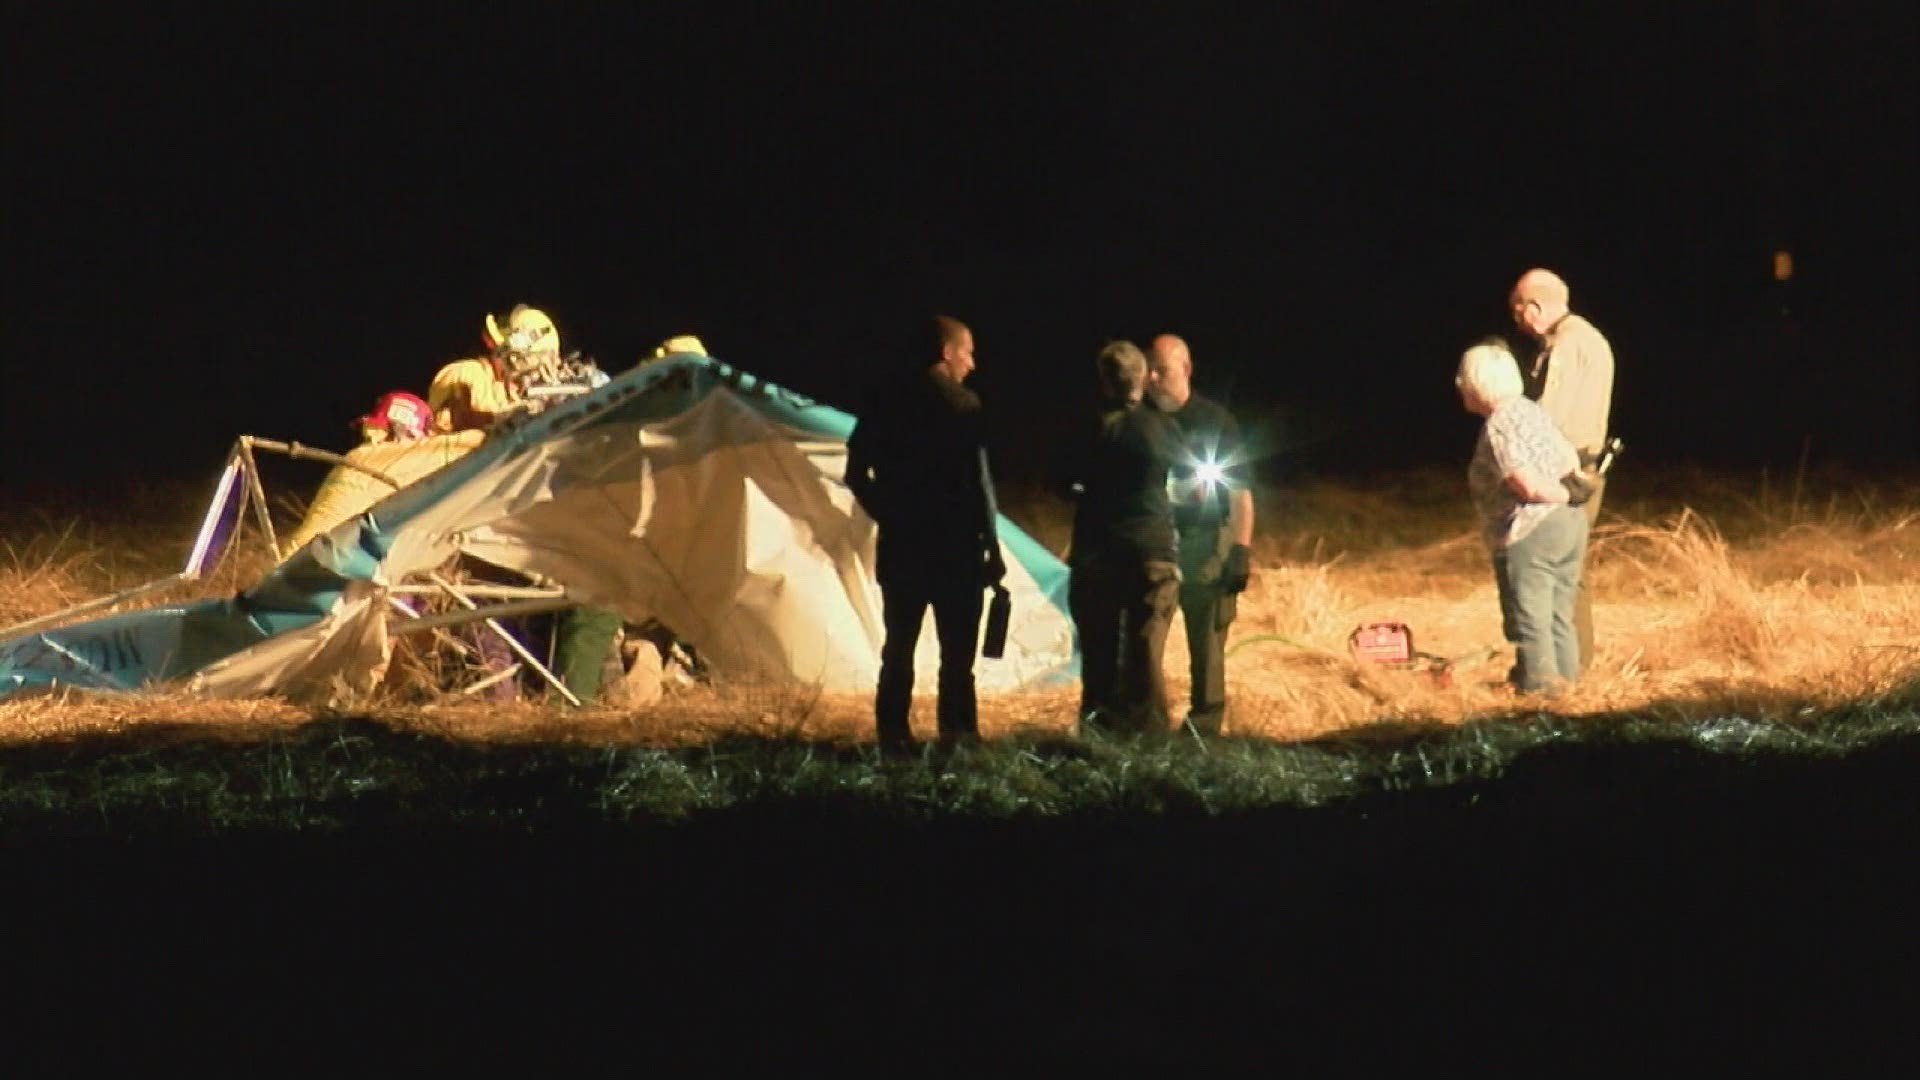 Officials said two people died in a crash while flying in a powered hand glider-type aircraft just north of Albany Friday evening.